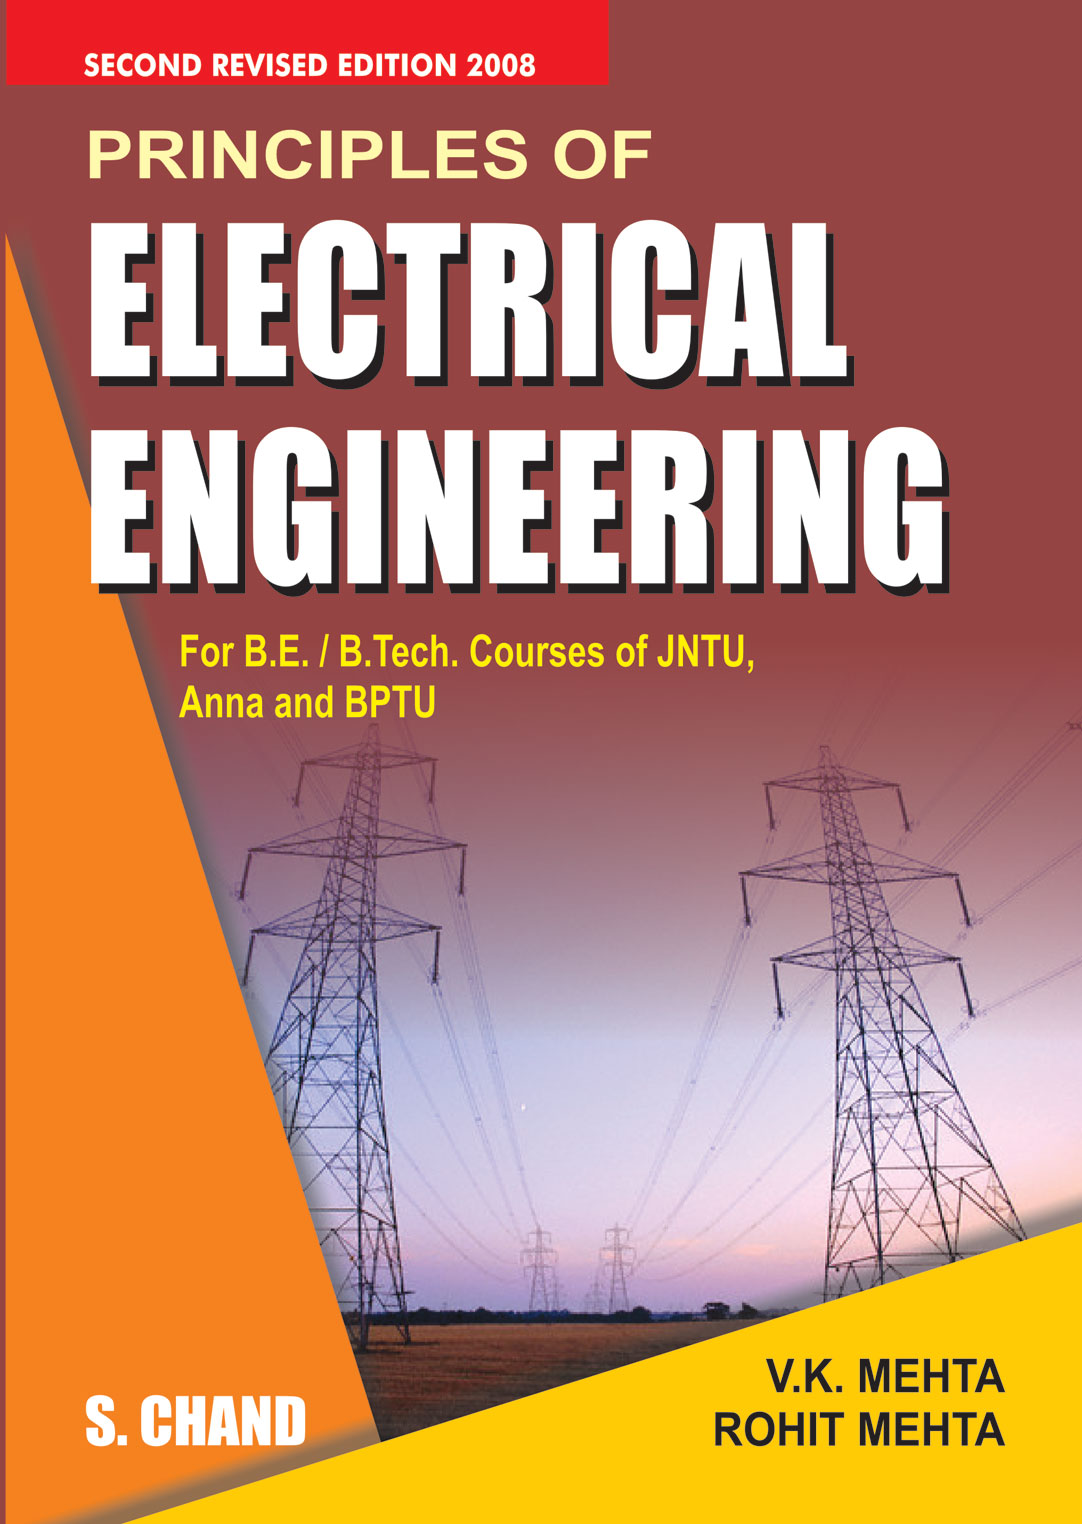 electrical engineering thesis pdf